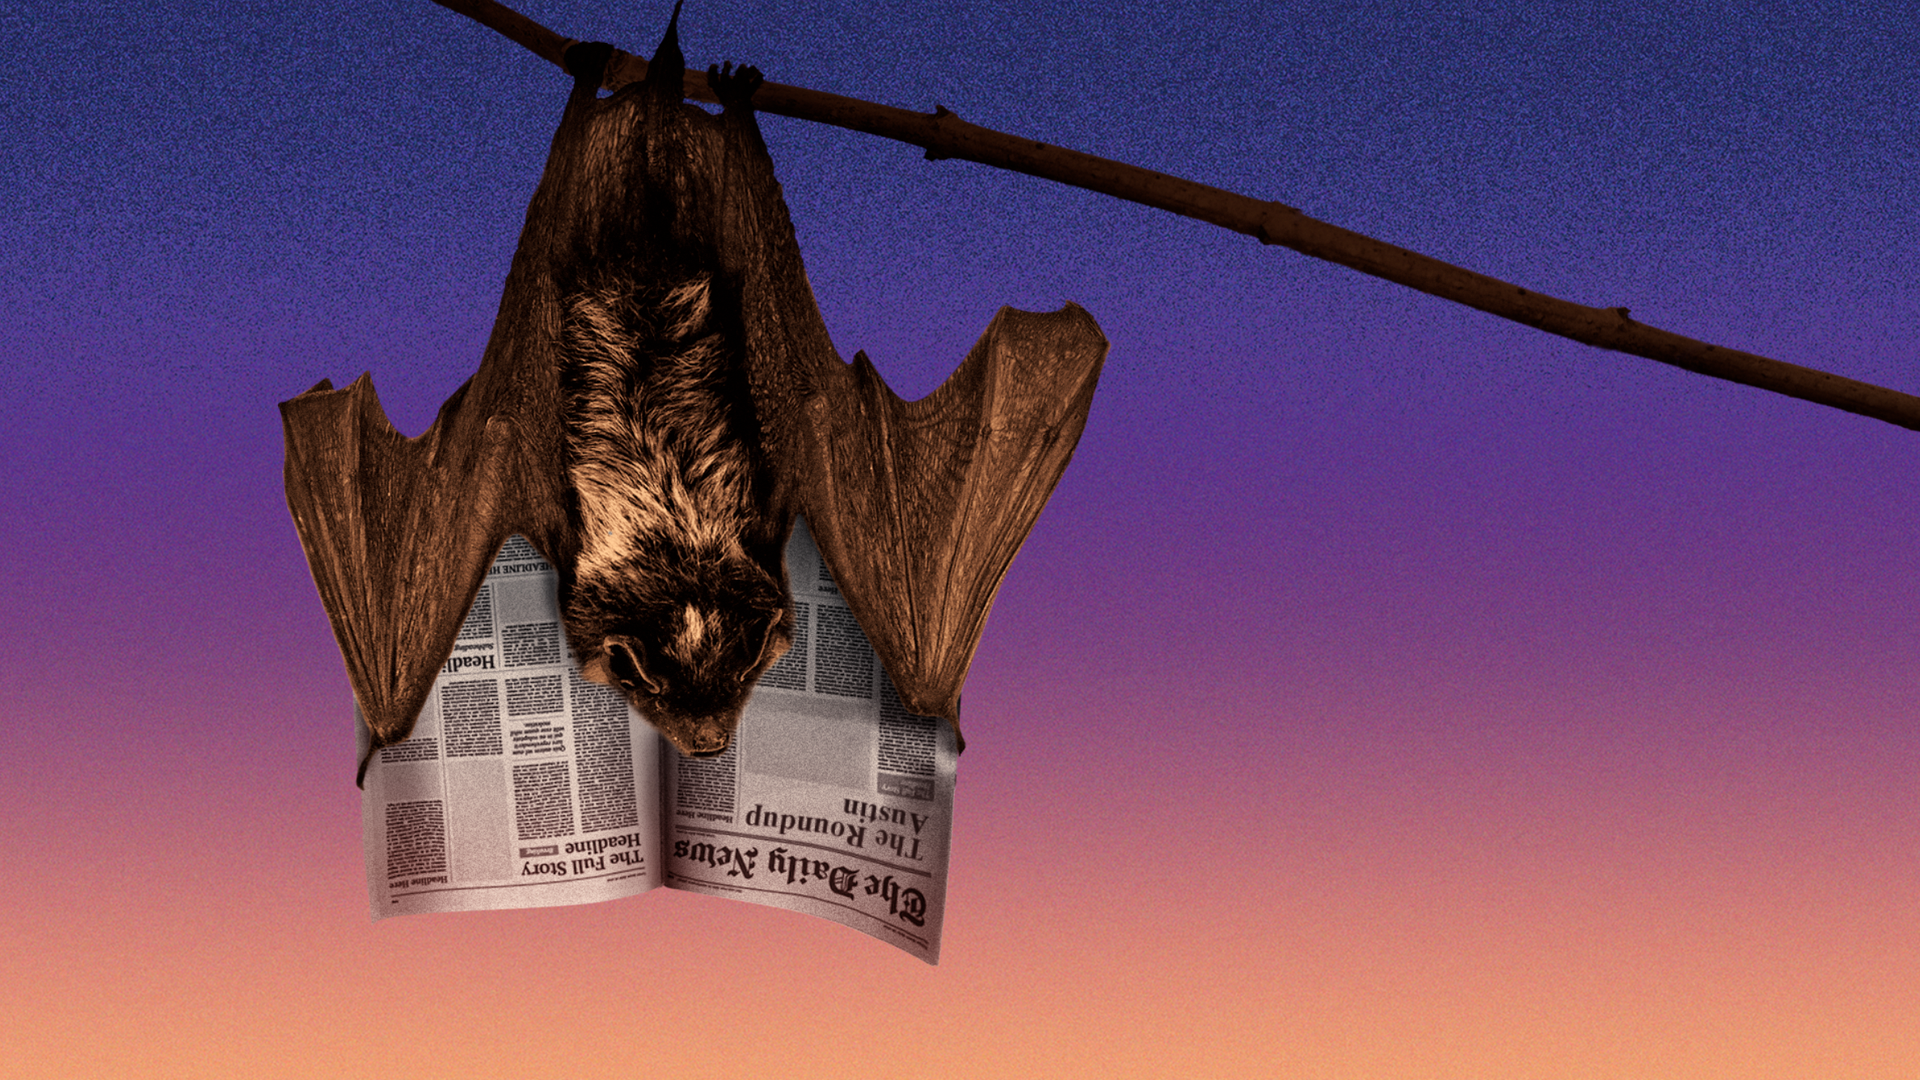 Illustration of a bat reading a newspaper while hanging upside down.